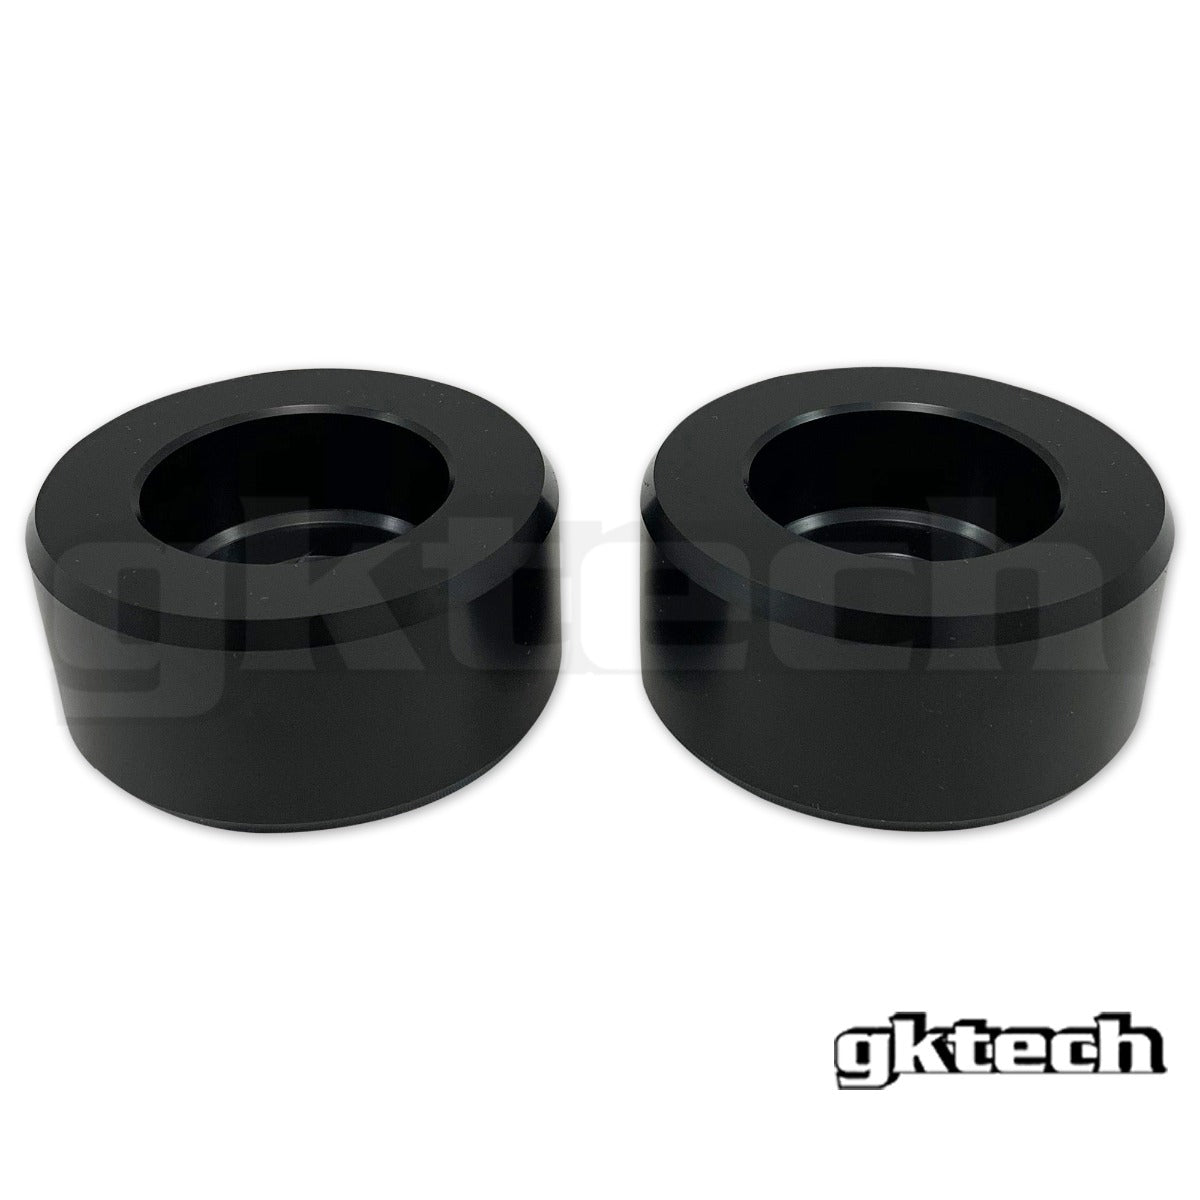 240sx/Skyline/300zx Chassis solid Differential Bushings